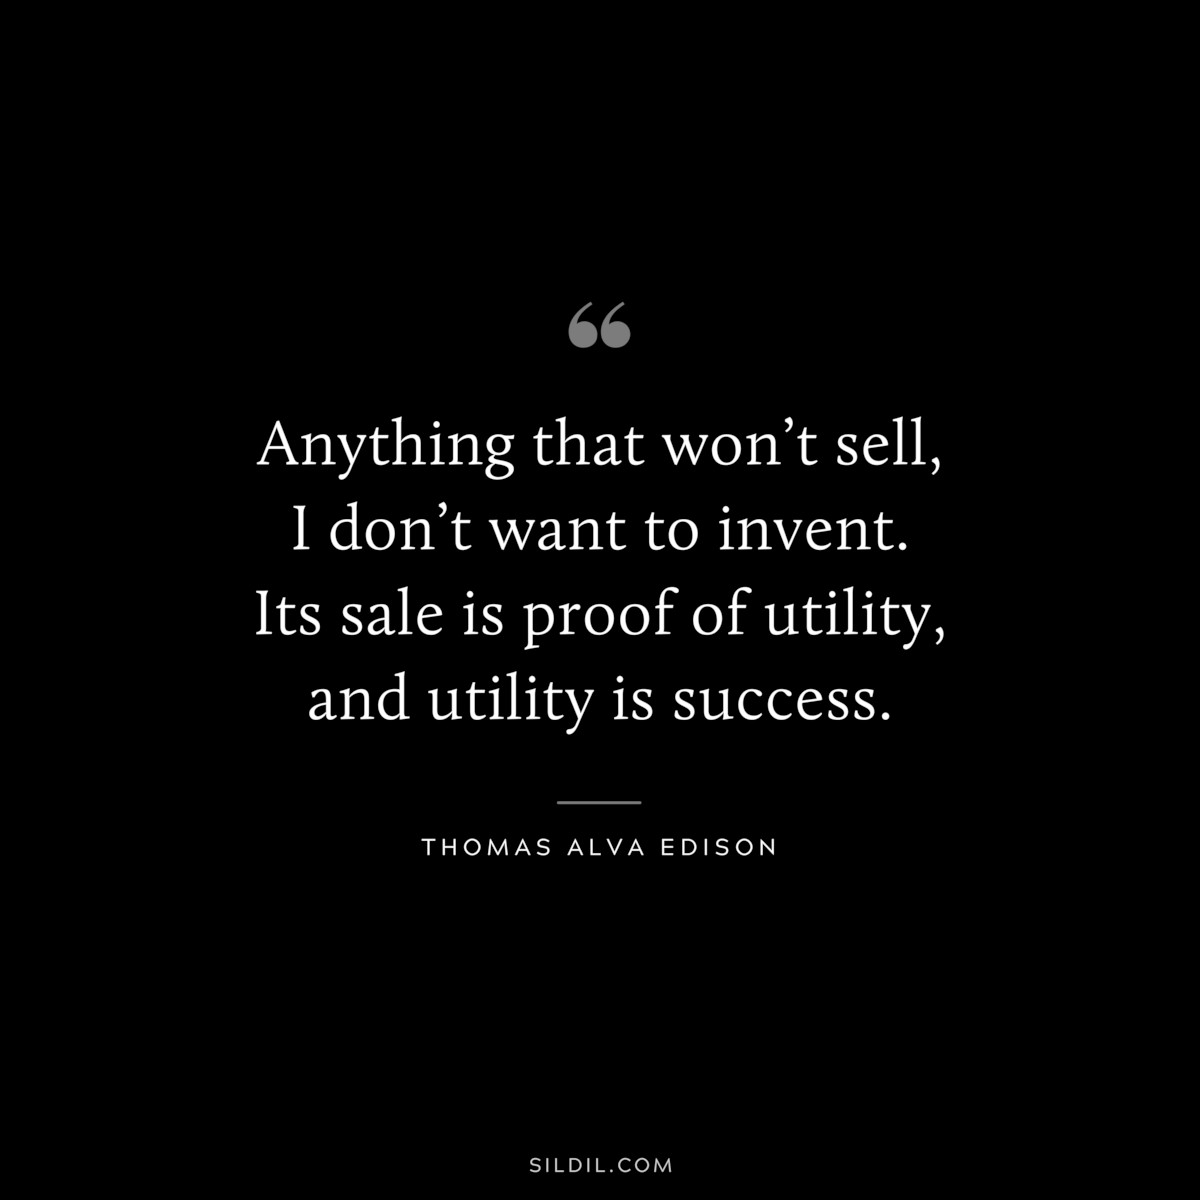 Anything that won’t sell, I don’t want to invent. Its sale is proof of utility, and utility is success. ― Thomas Alva Edison